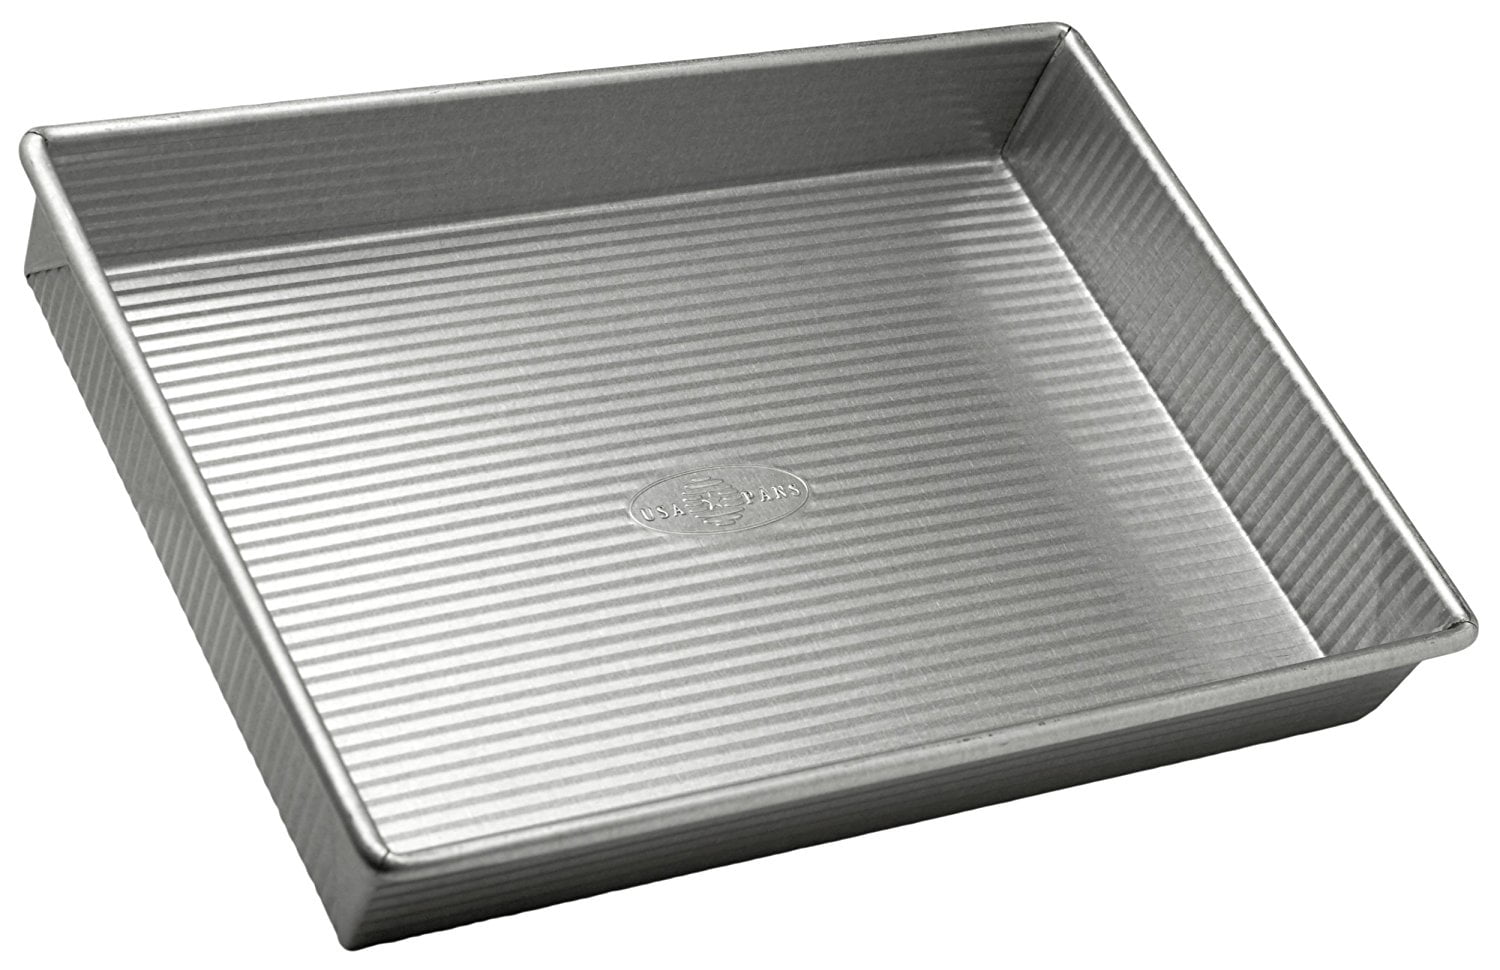 USA Pan Bakeware Round Cake Pan Made in the USA from Aluminized Steel Nonstick & Quick Release Coating 8 inch 